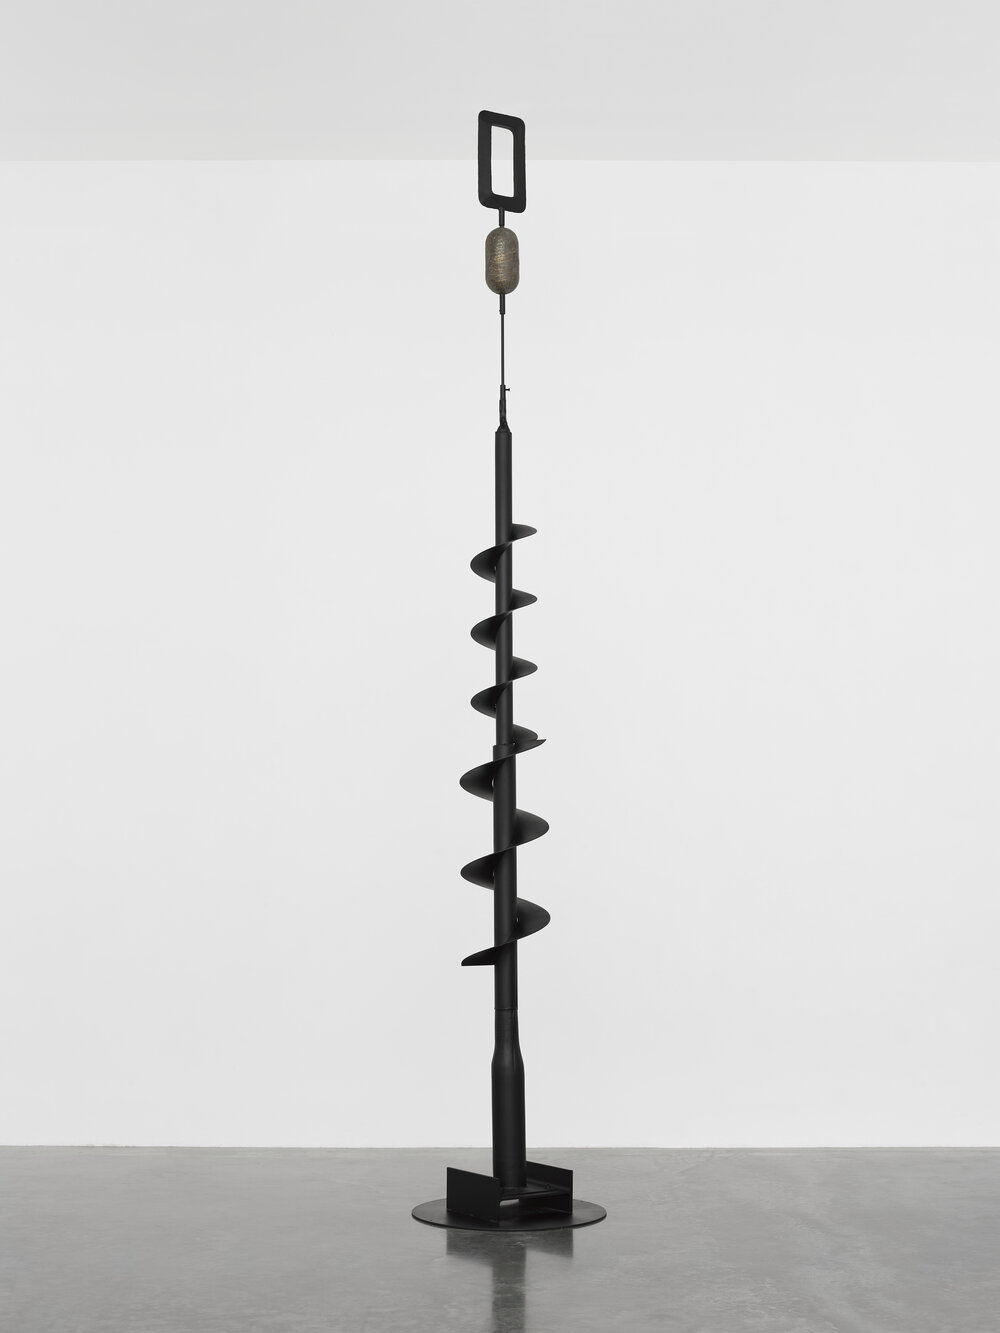  Signal, 1974. Painted iron and found objects, 1935/16 x337/16x337/16in. (491x85 x 85 cm) © Takis Foundation.   Photo © White Cube (Theo Christelis) 